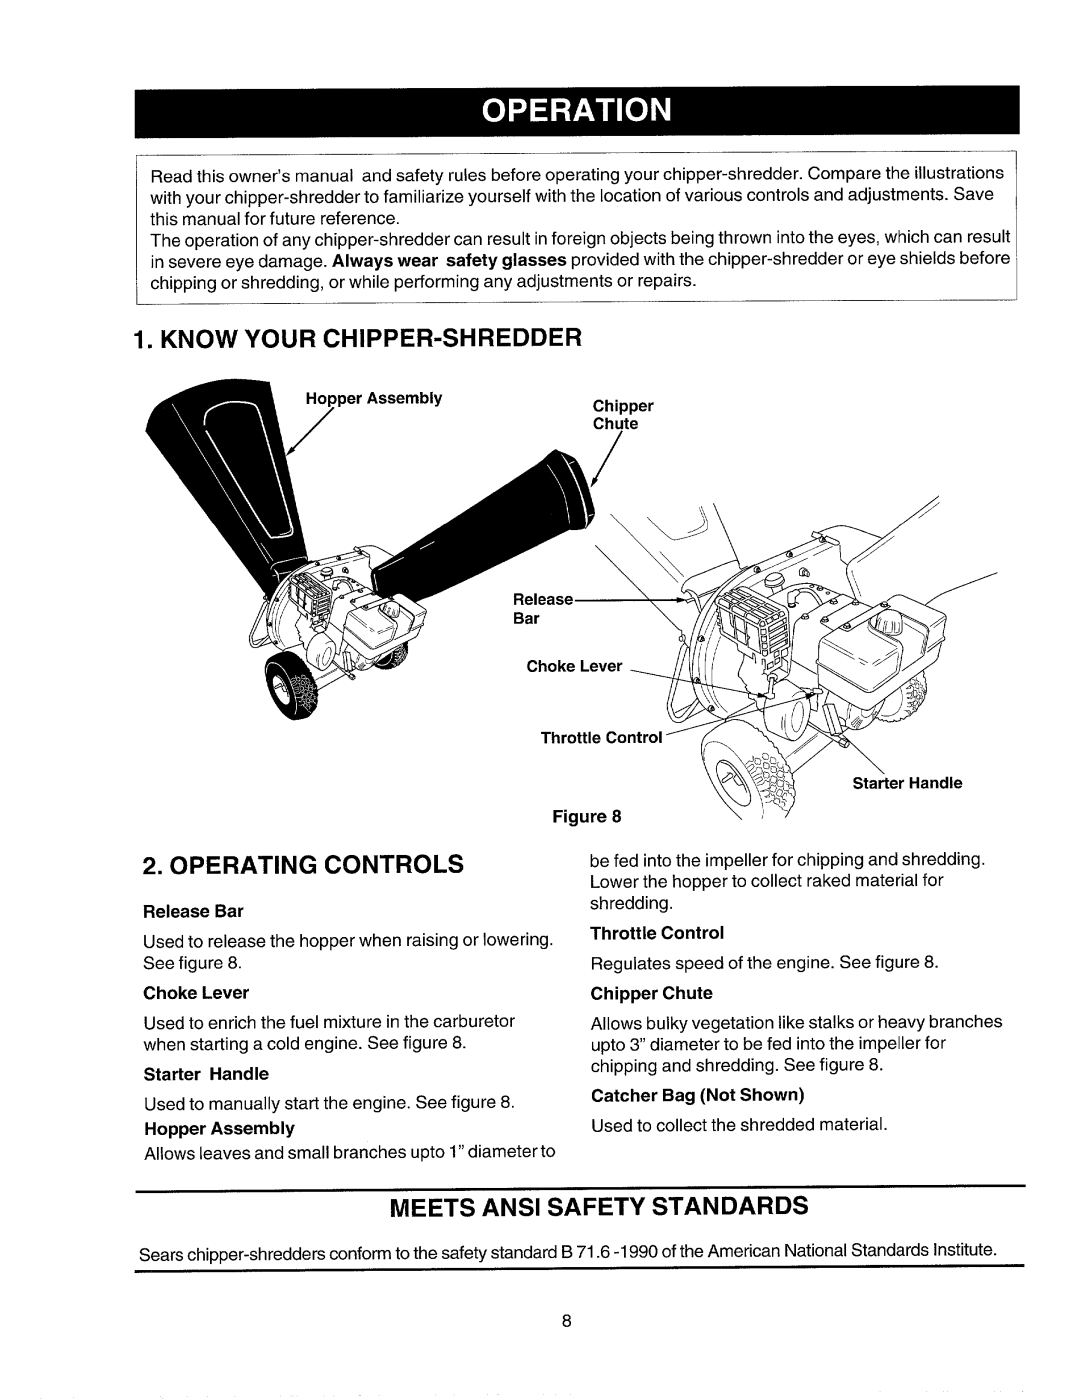 Craftsman 247.77586 Know Your Chipper-Shredder, Operating Controls, Meets Ansi Safety Standards, R:lreaSe C Starter Handle 